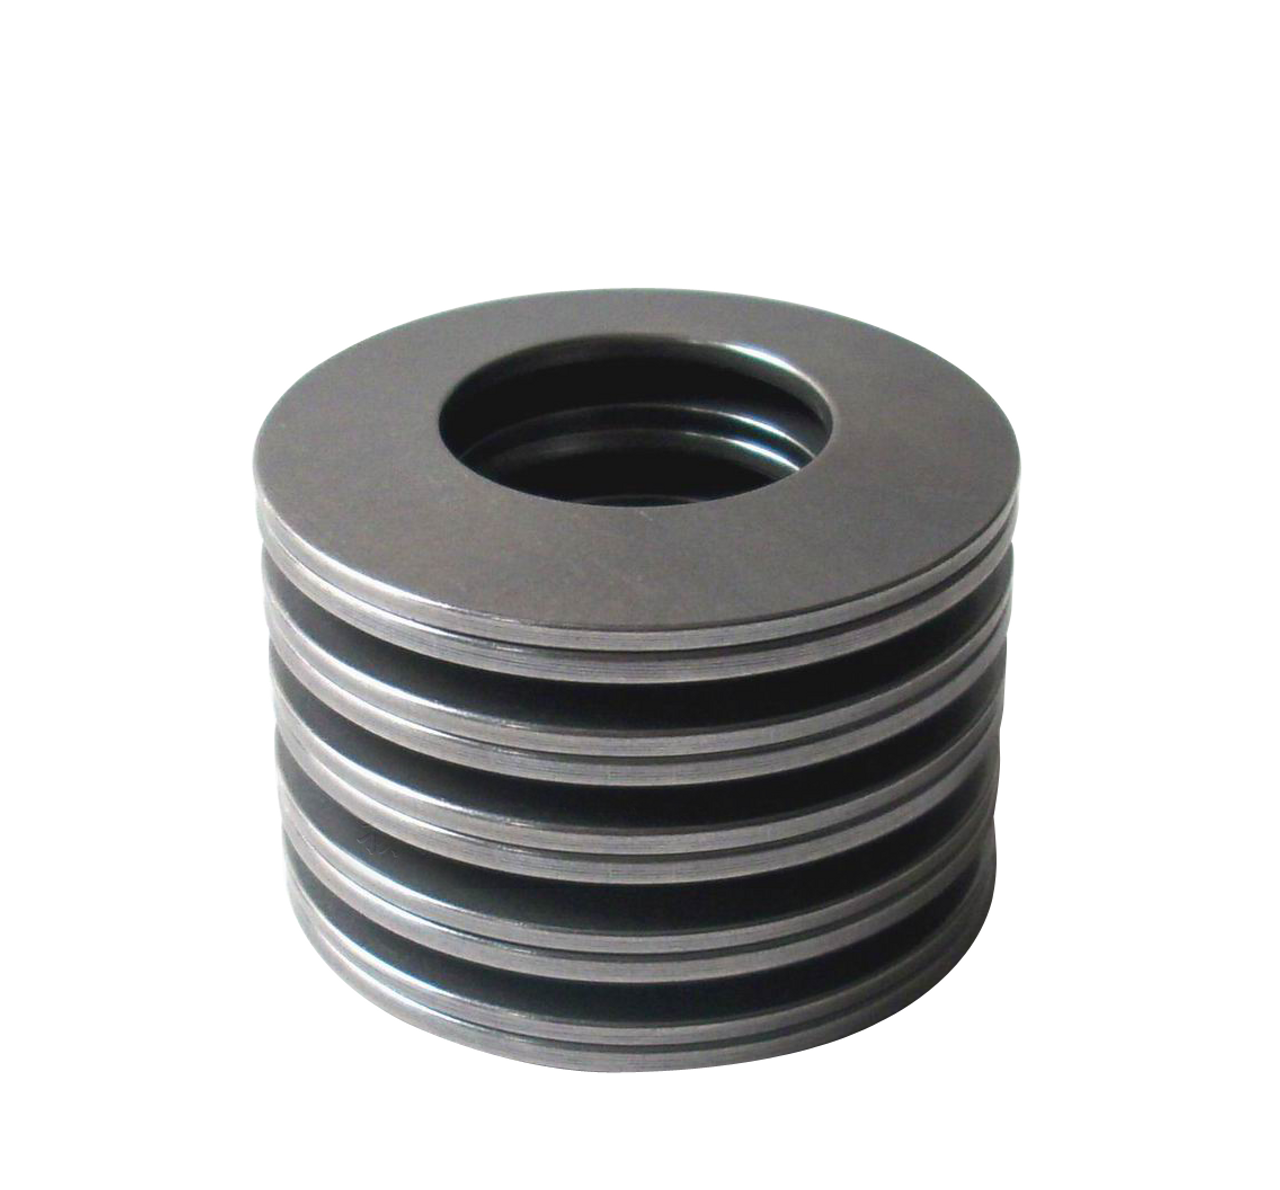 5mm Disc Spring (DIN 2093) Conical Washer  DS005.2-010-05